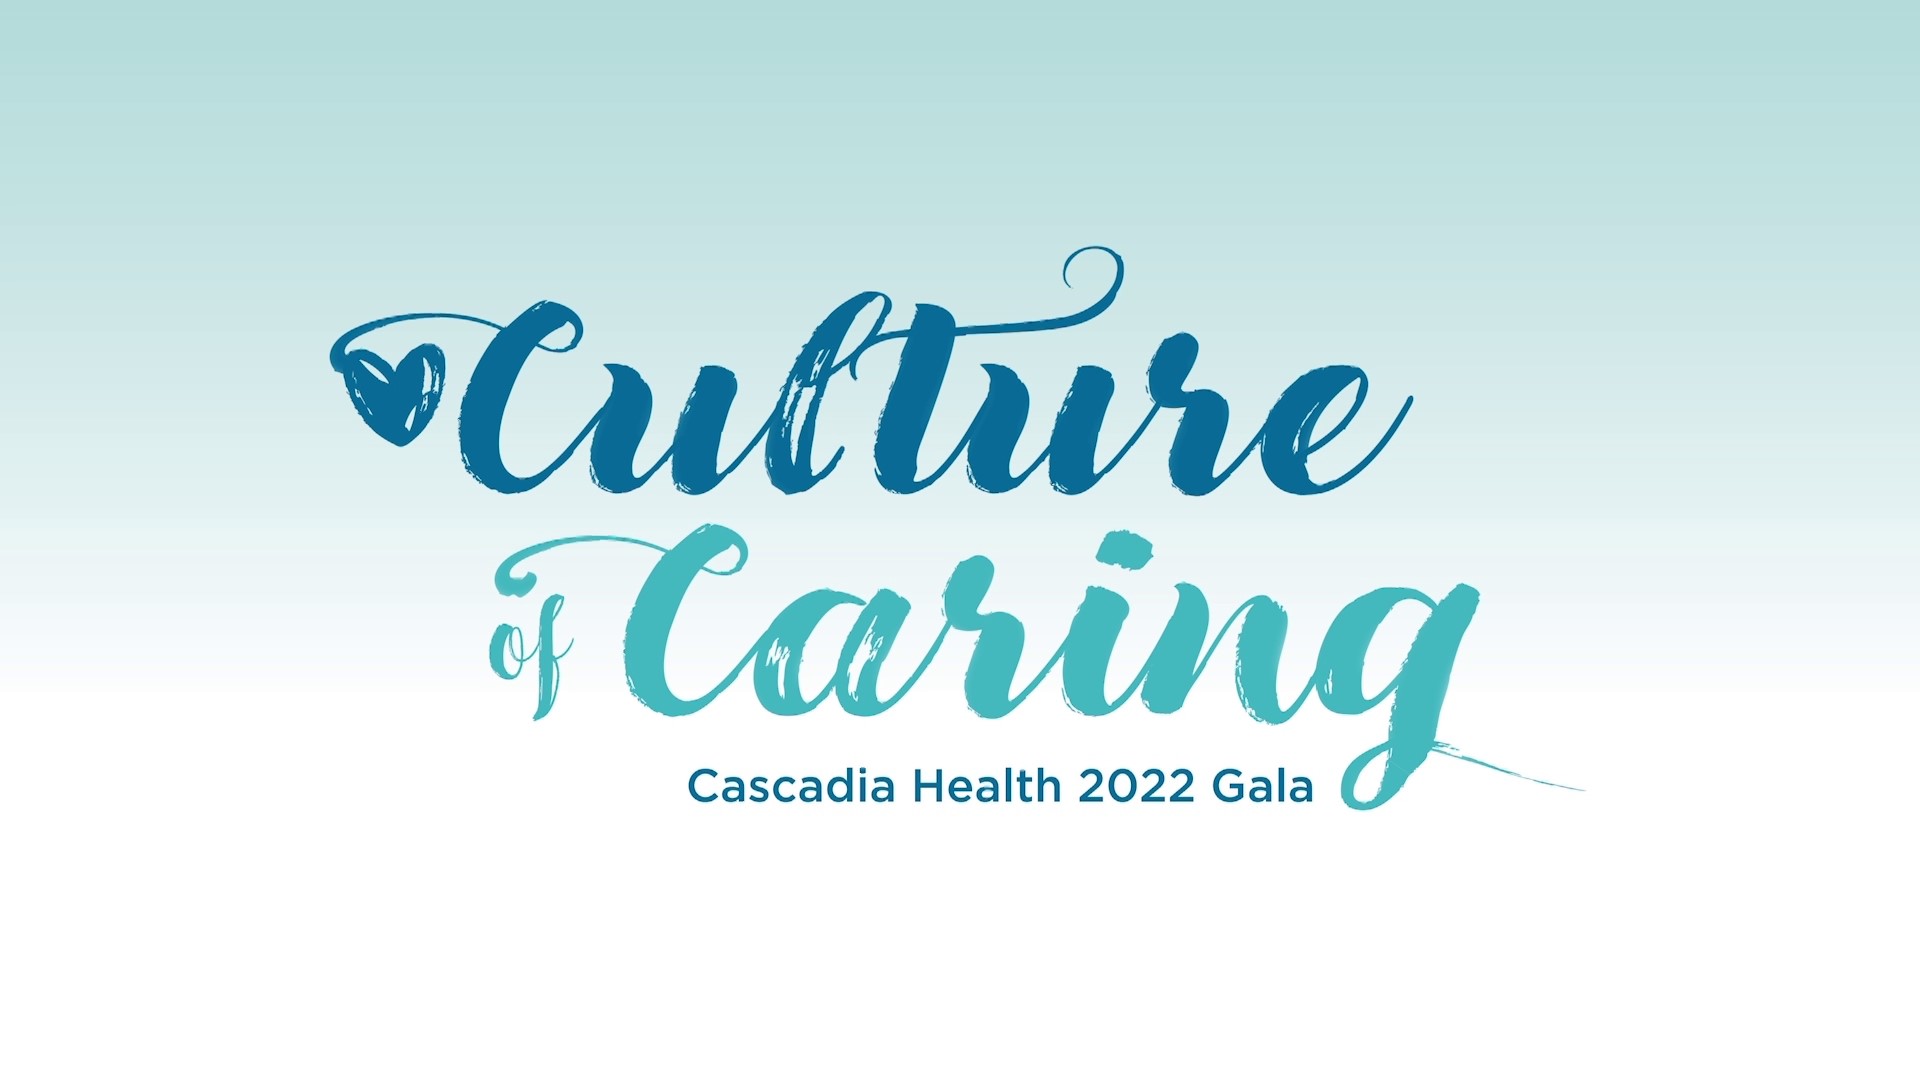 Cascade Behavioral Health Gala 2022: Culture of Caring. Stories of positive community impact and a special appearance by China Forbes from Pink Martini